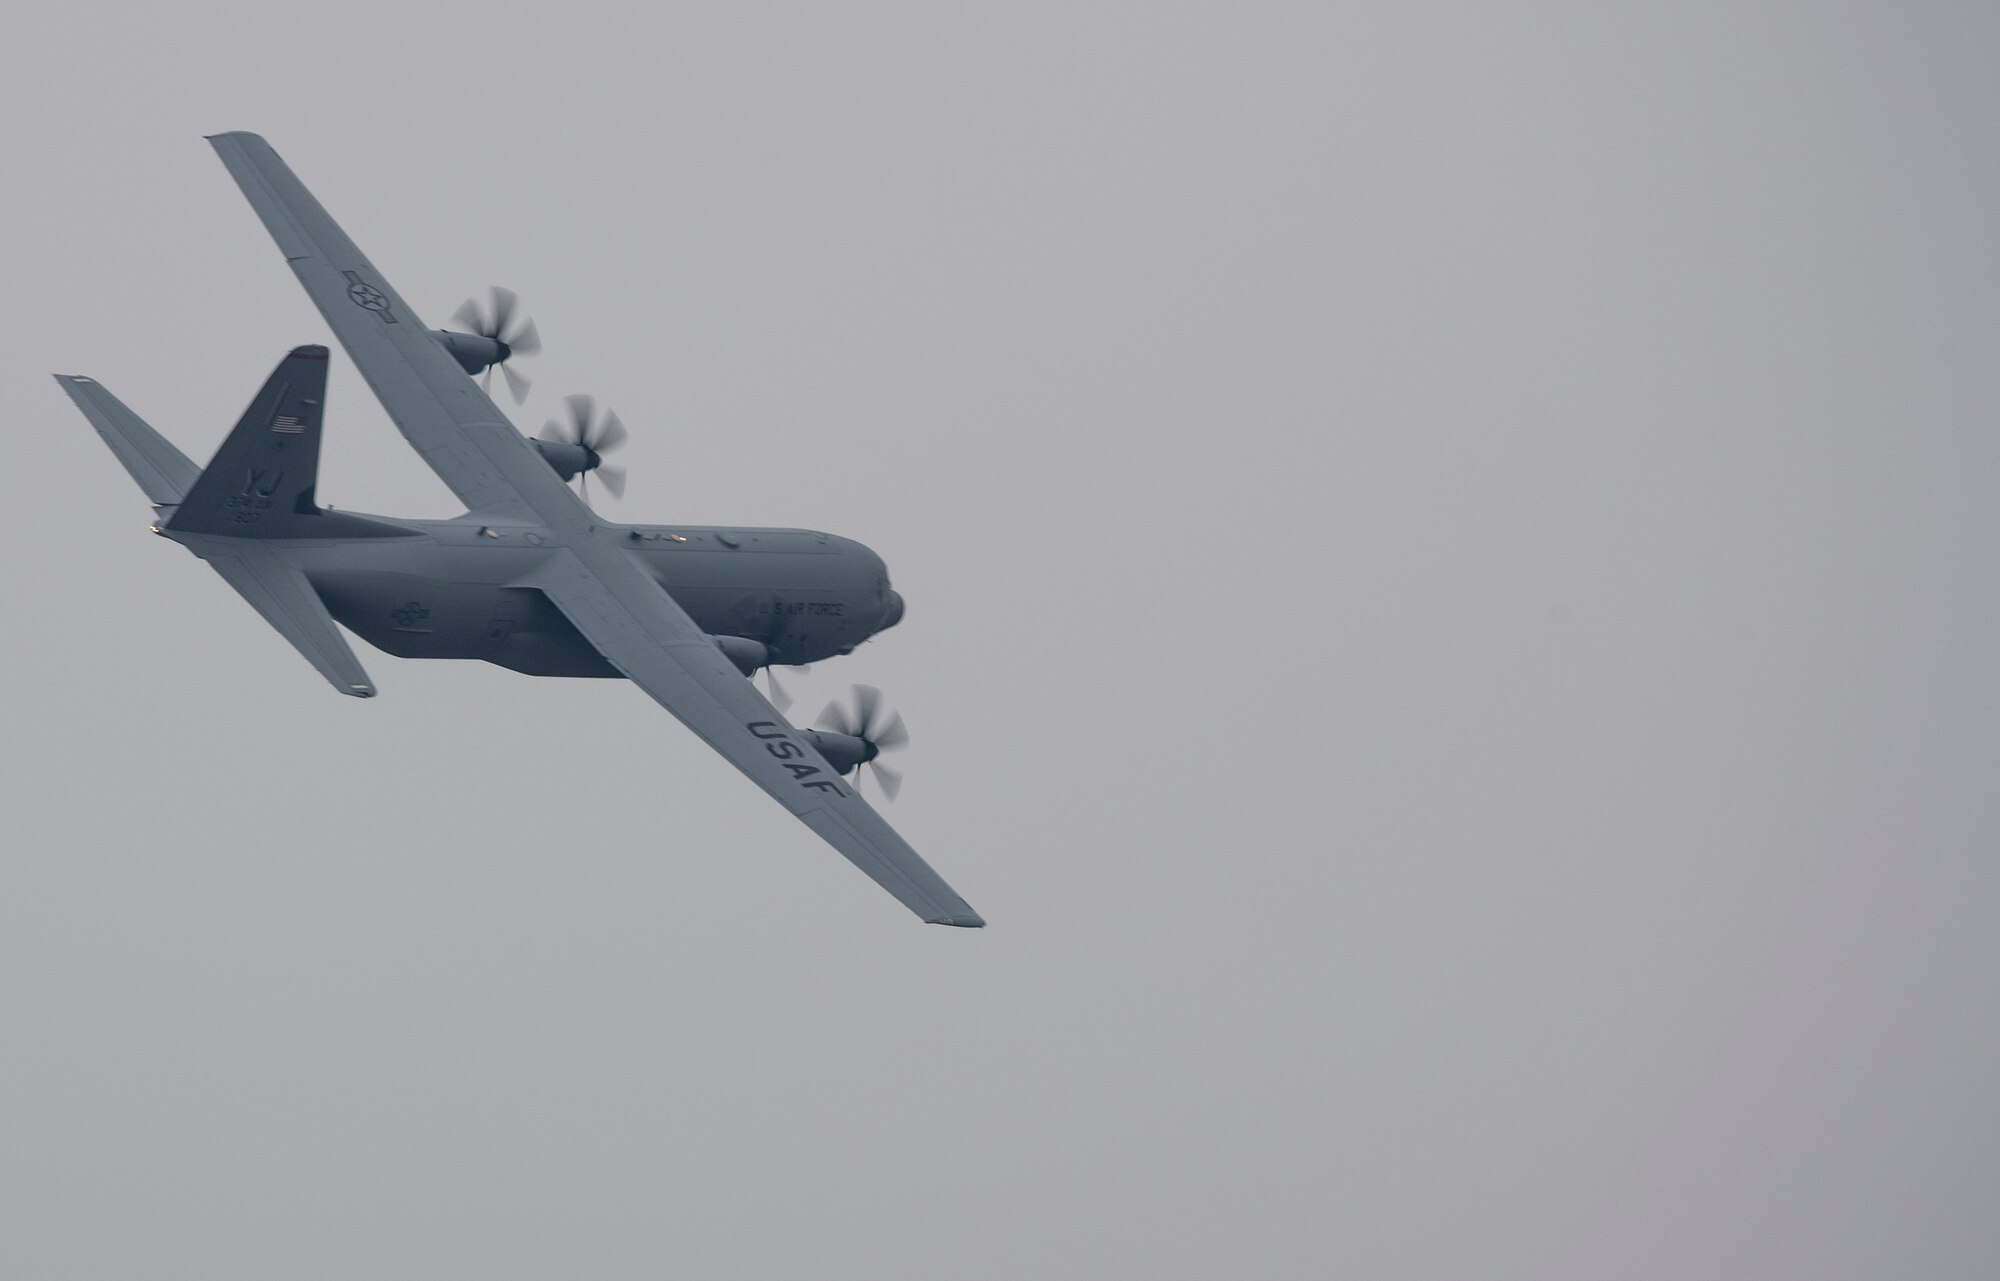 A C-130J Super Hercules with the 36th Airlift Squadron flies over Yokota Air Base, Japan, March 6, 2016. Compared to older C-130s, the J model climbs faster and higher, flies farther at a higher cruise speed, and takes off and lands in a shorter distance. (U.S. Air Force photo by Staff Sgt. David Owsianka)